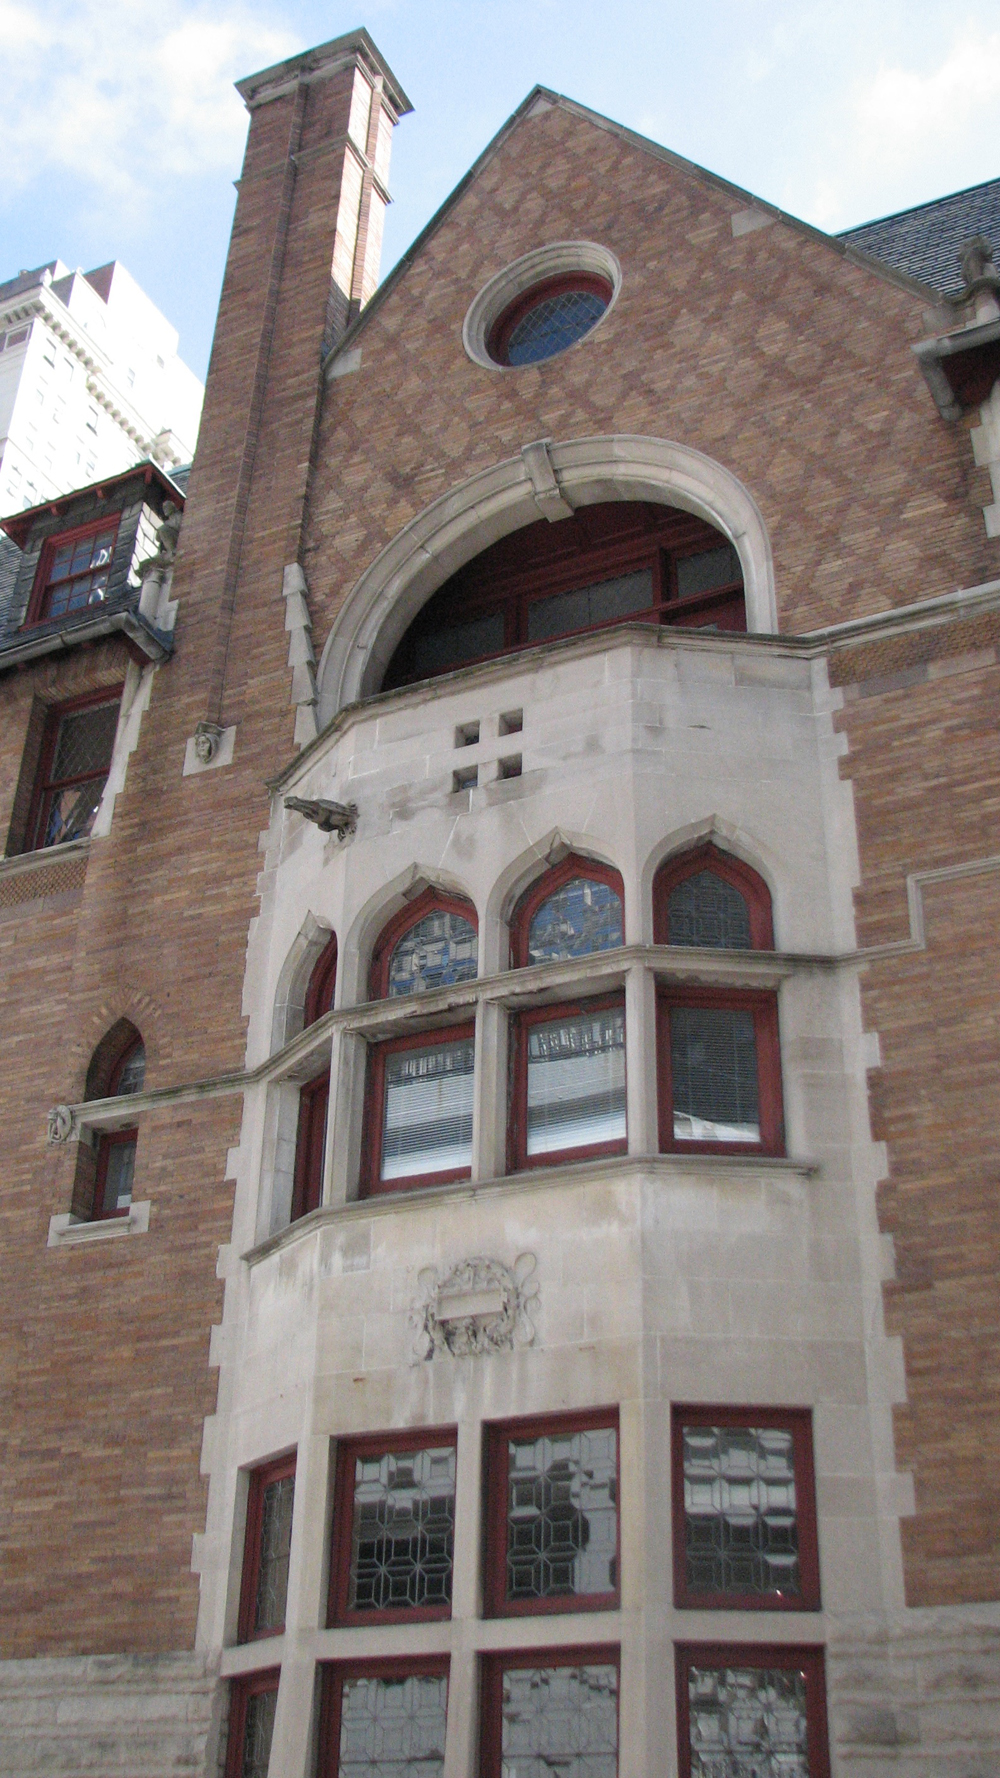 The side of the Moore House features a Venetian-style loggia on the top floor.